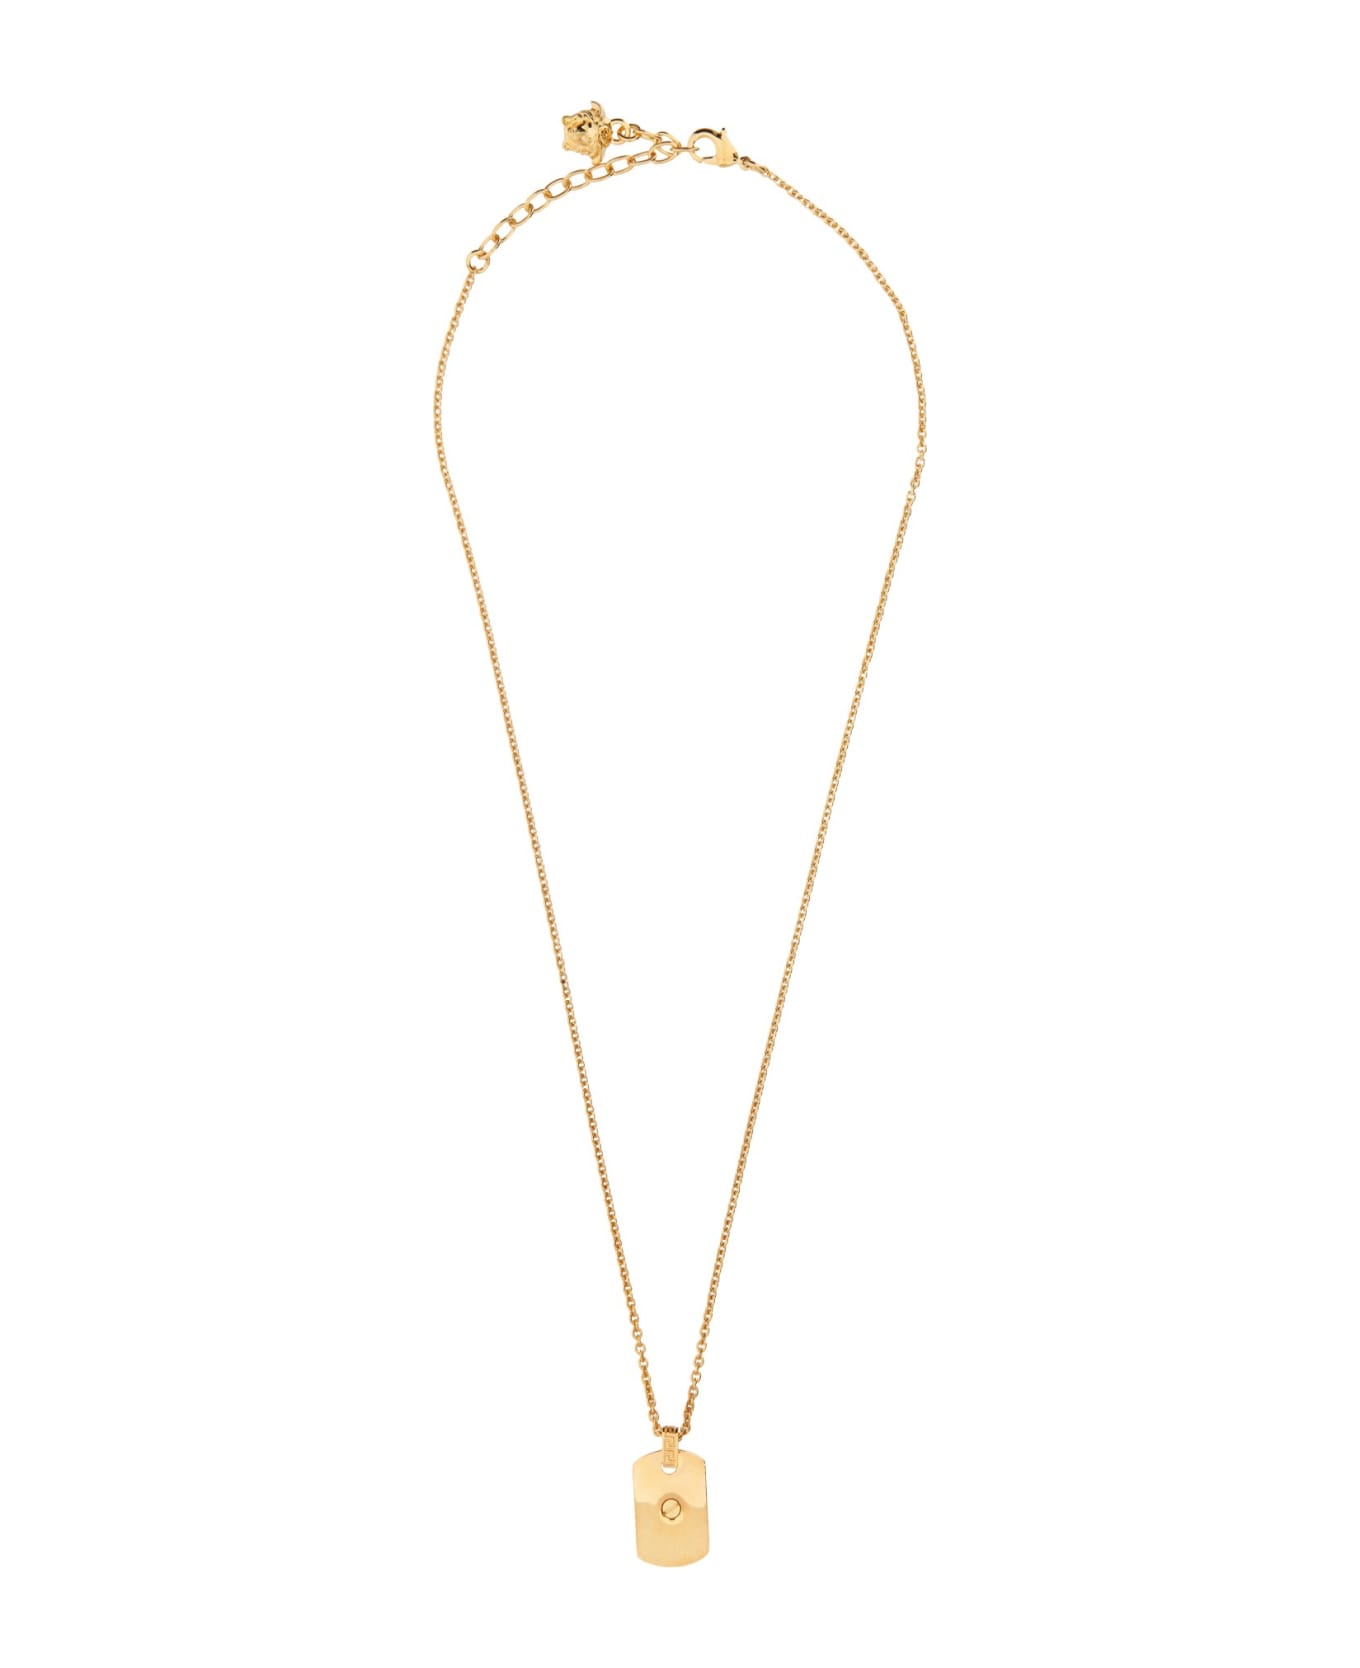 Versace Jellyfish Necklace - Gold ネックレス